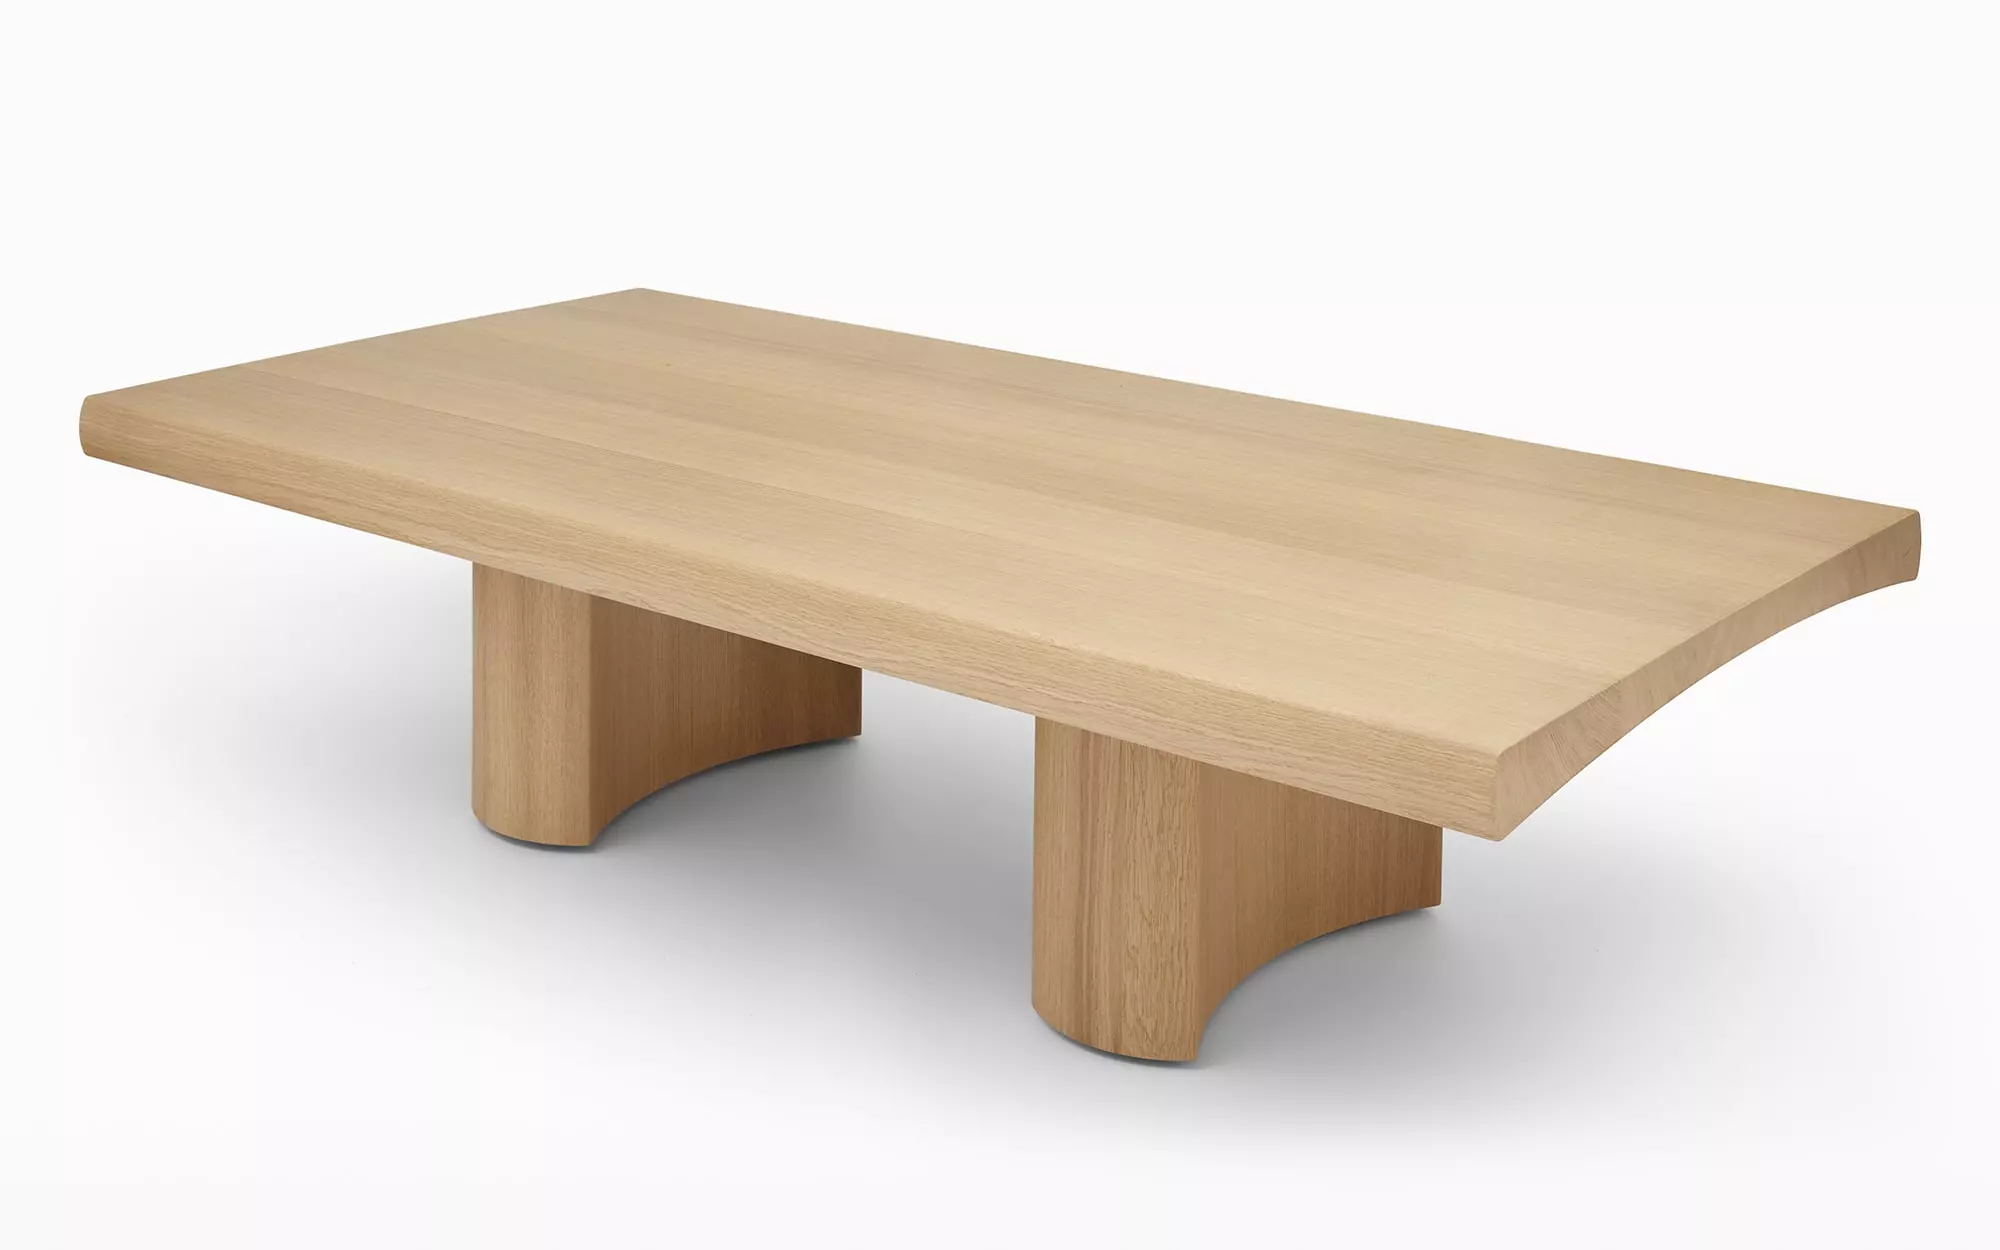 Hakone Coffee table - Edward Barber and Jay Osgerby - Bench - Galerie kreo